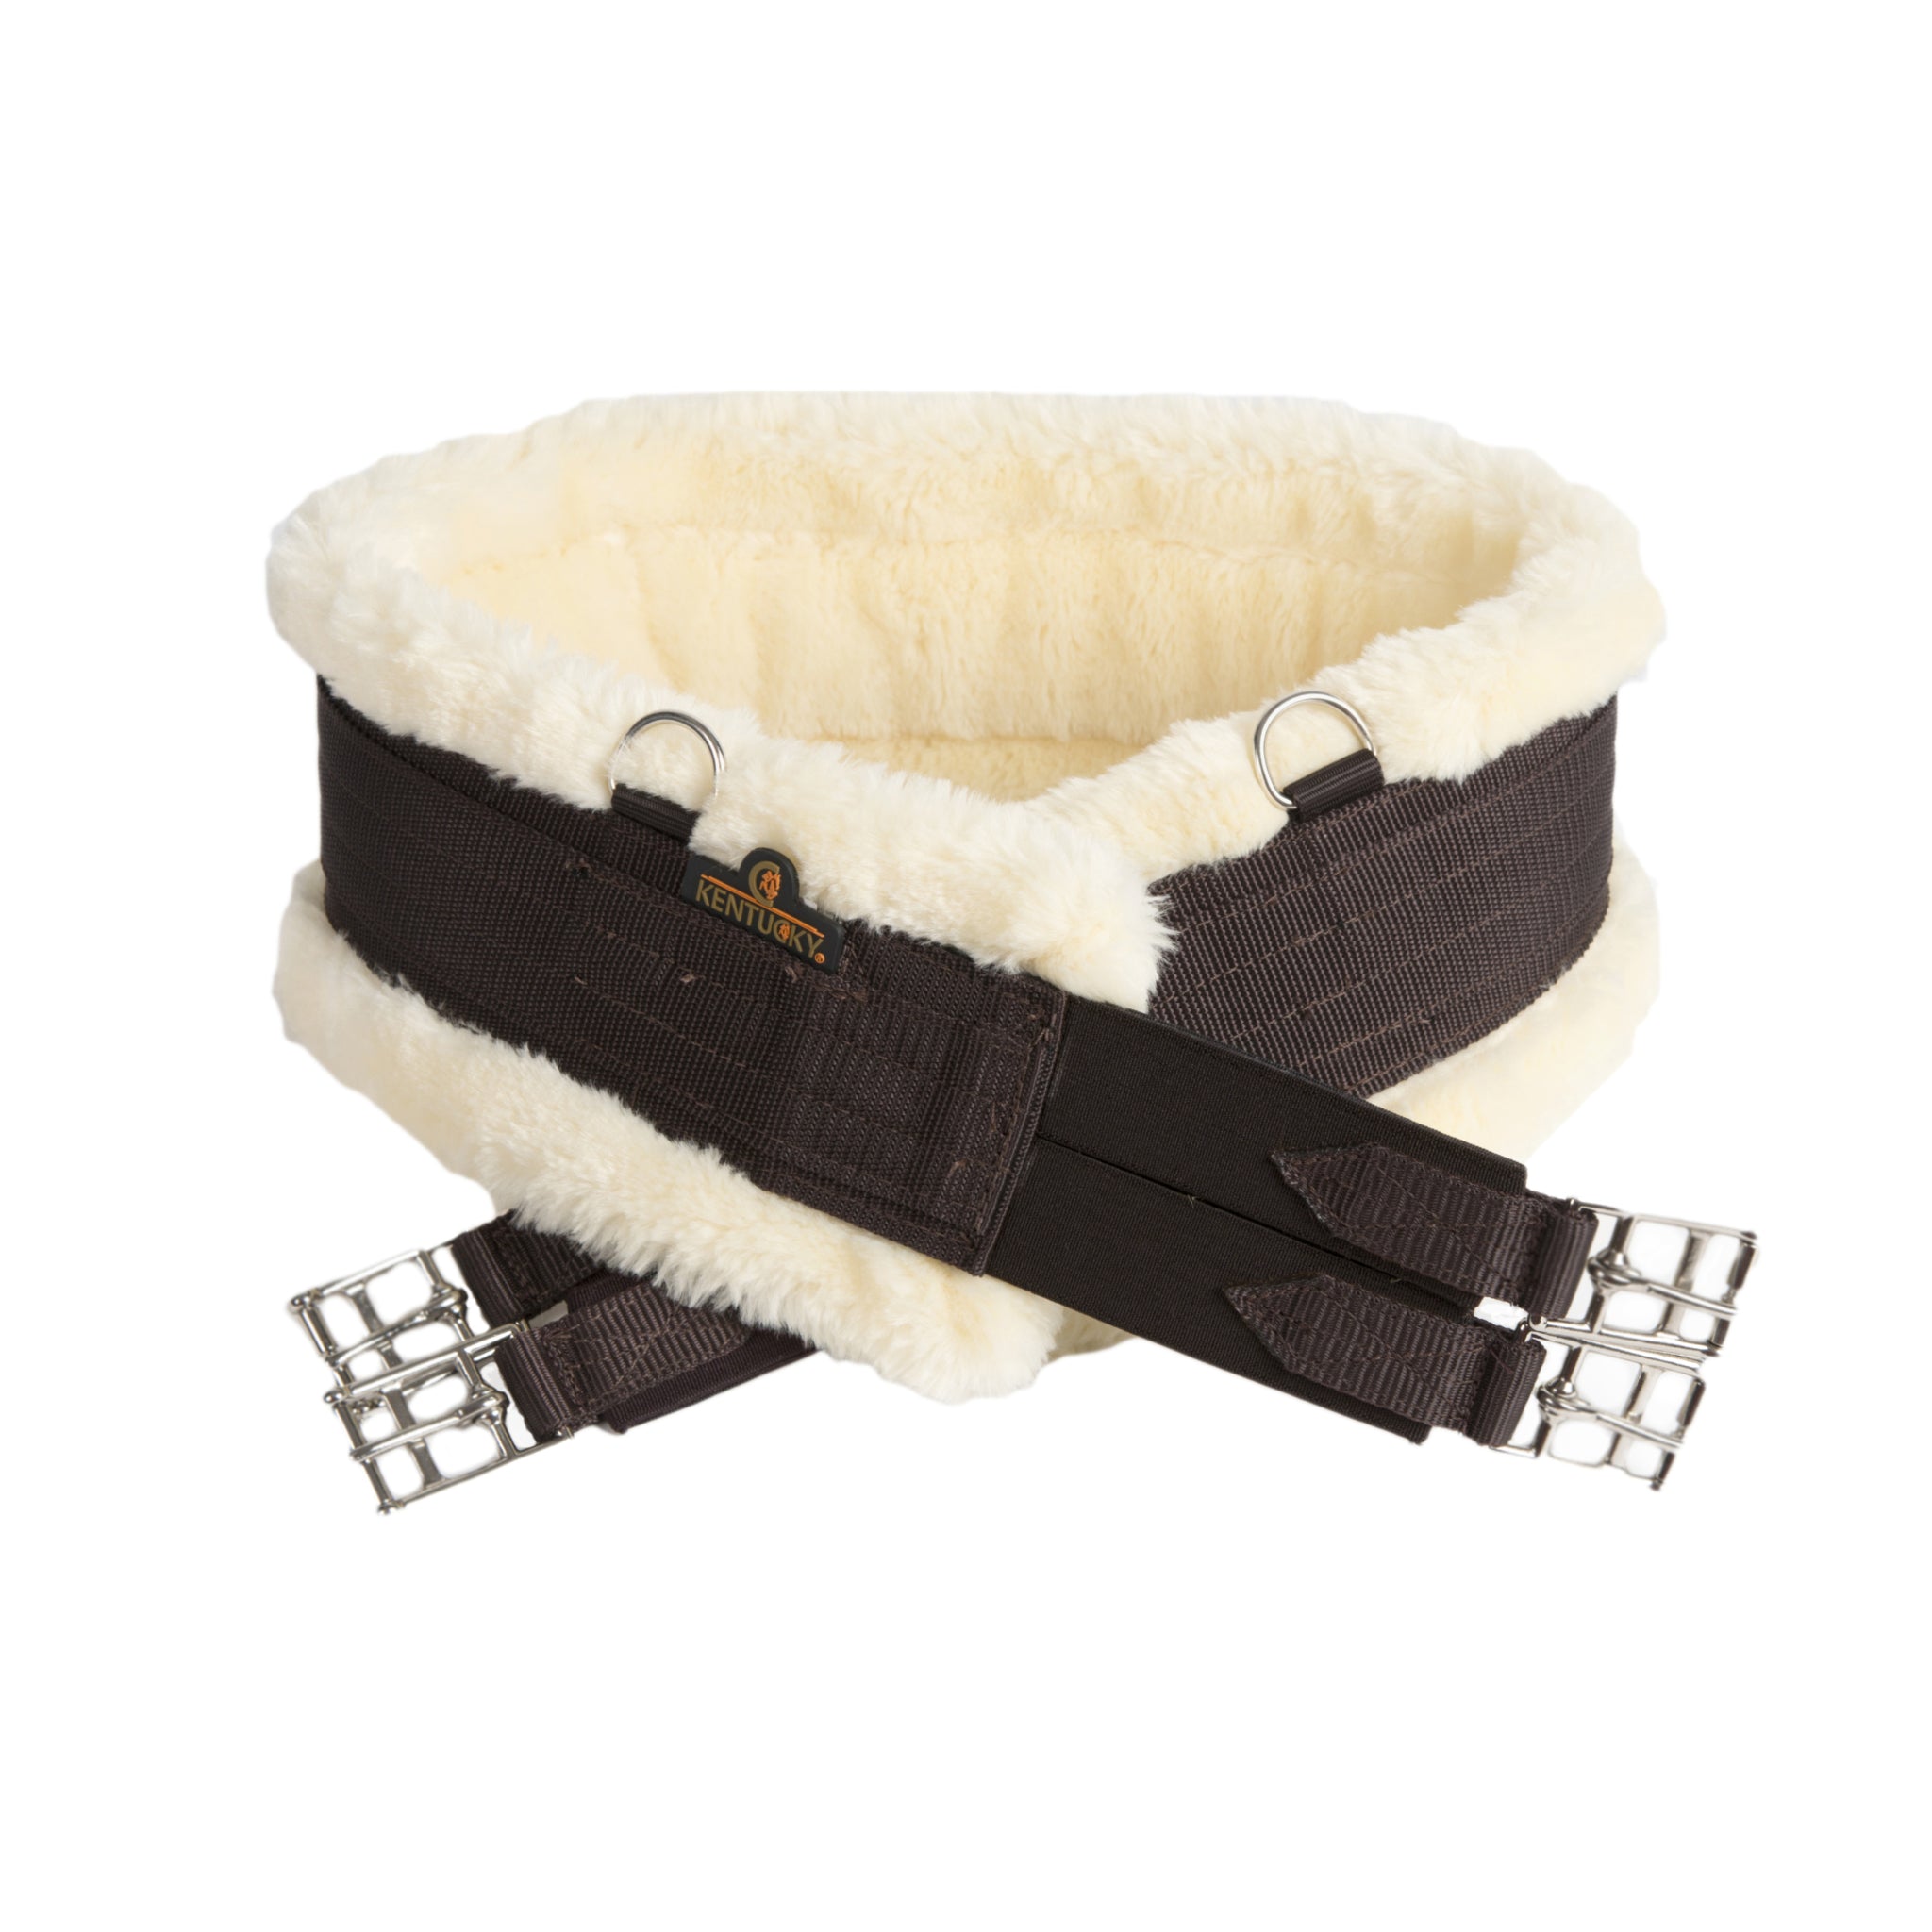 The Kentucky sheepskin Girth with nylon fleece lining is one of Kentuckys classic products thanks to its many qualities! Words like flexibility, softness, resistance, lightness and comfort describe this girth perfectly.